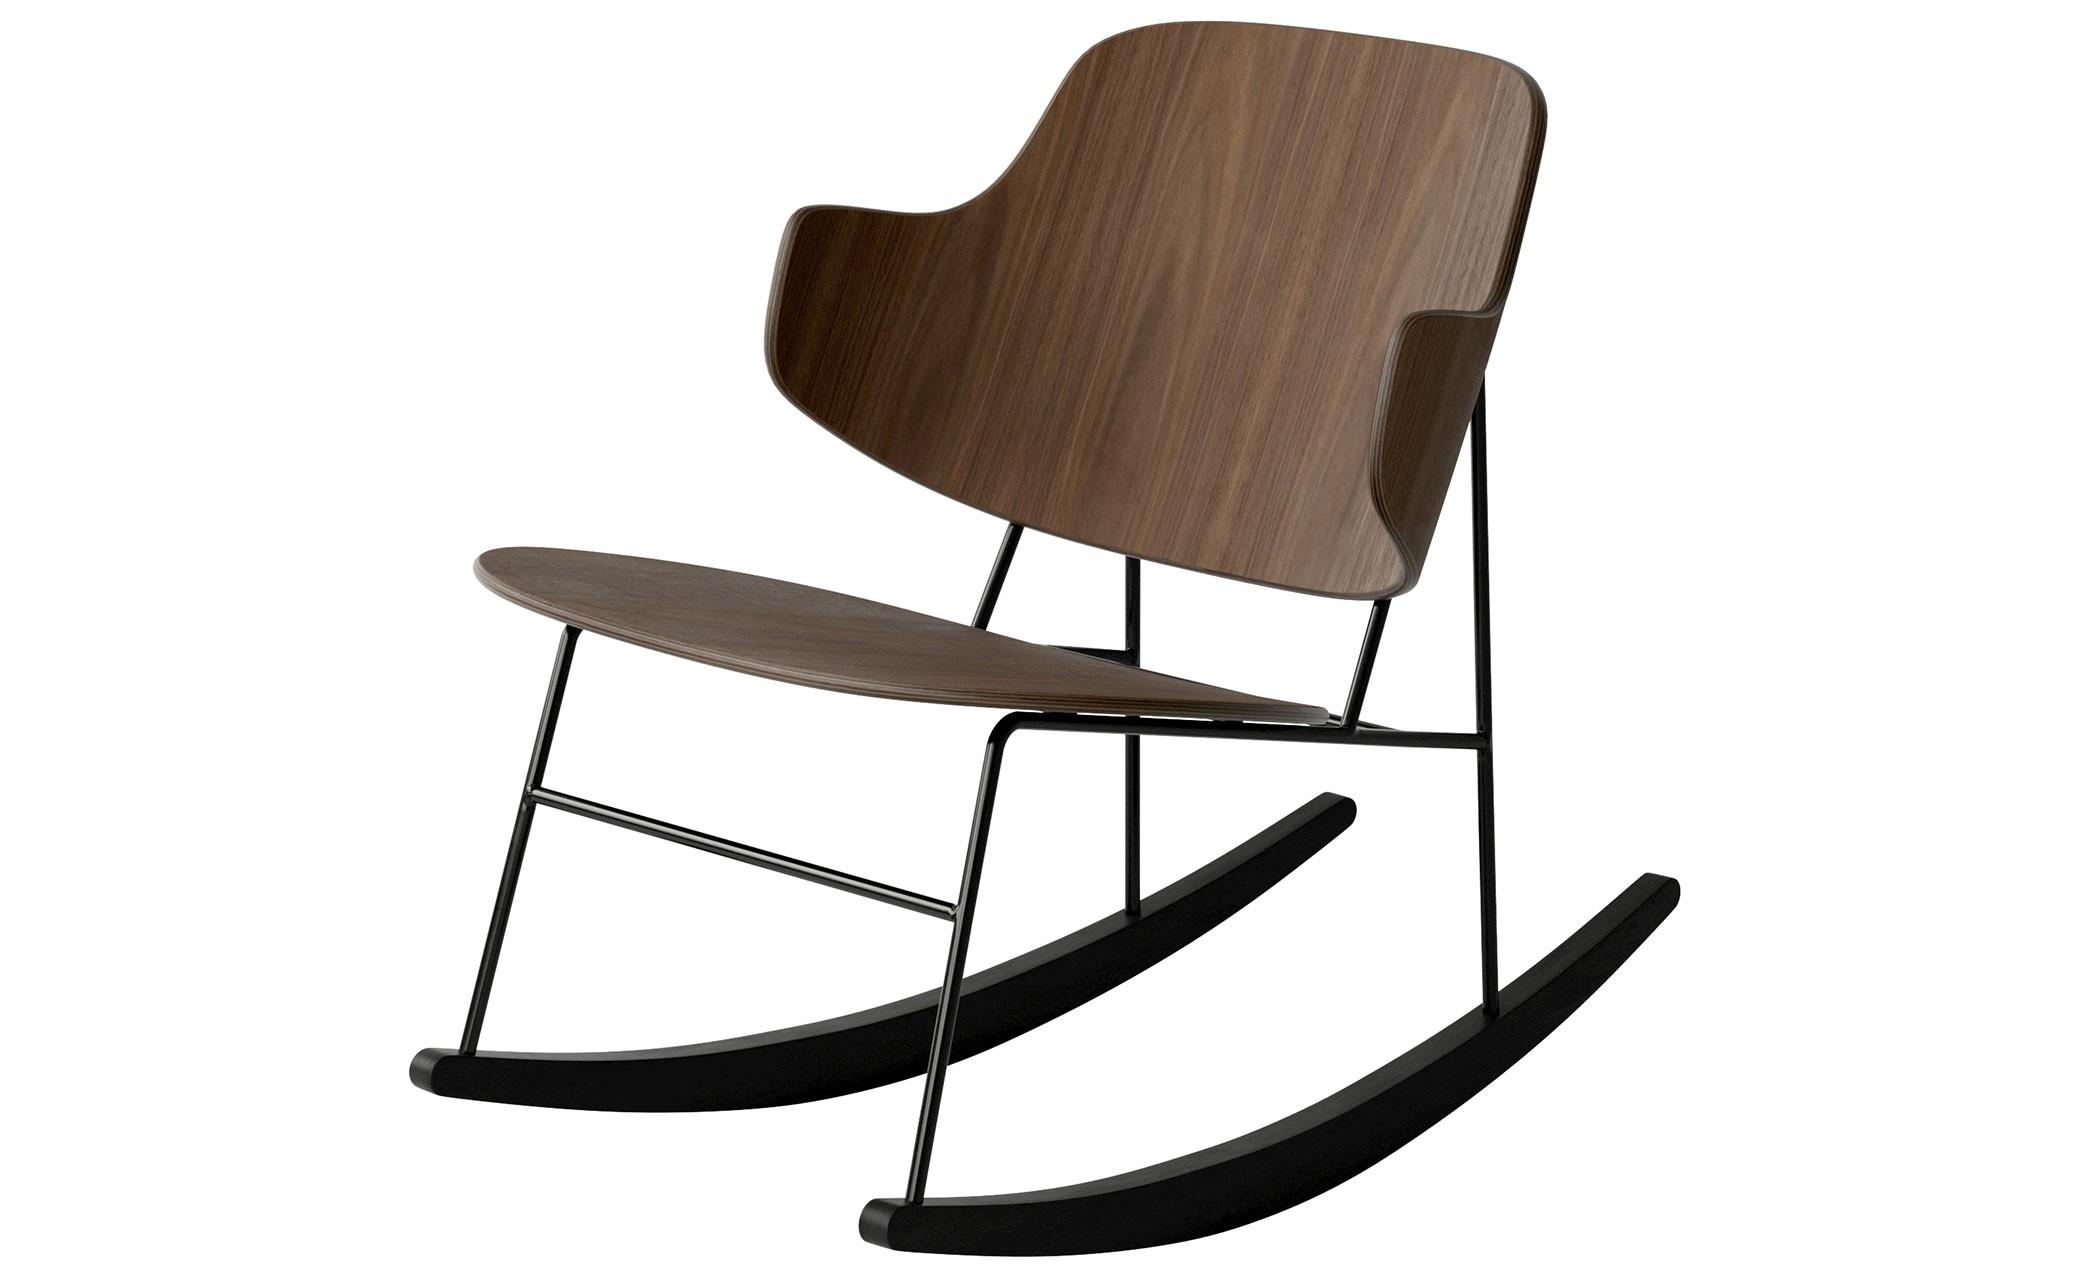 Penguin Rocking Chair by Ib Kofod-Larsen from Audo | hive